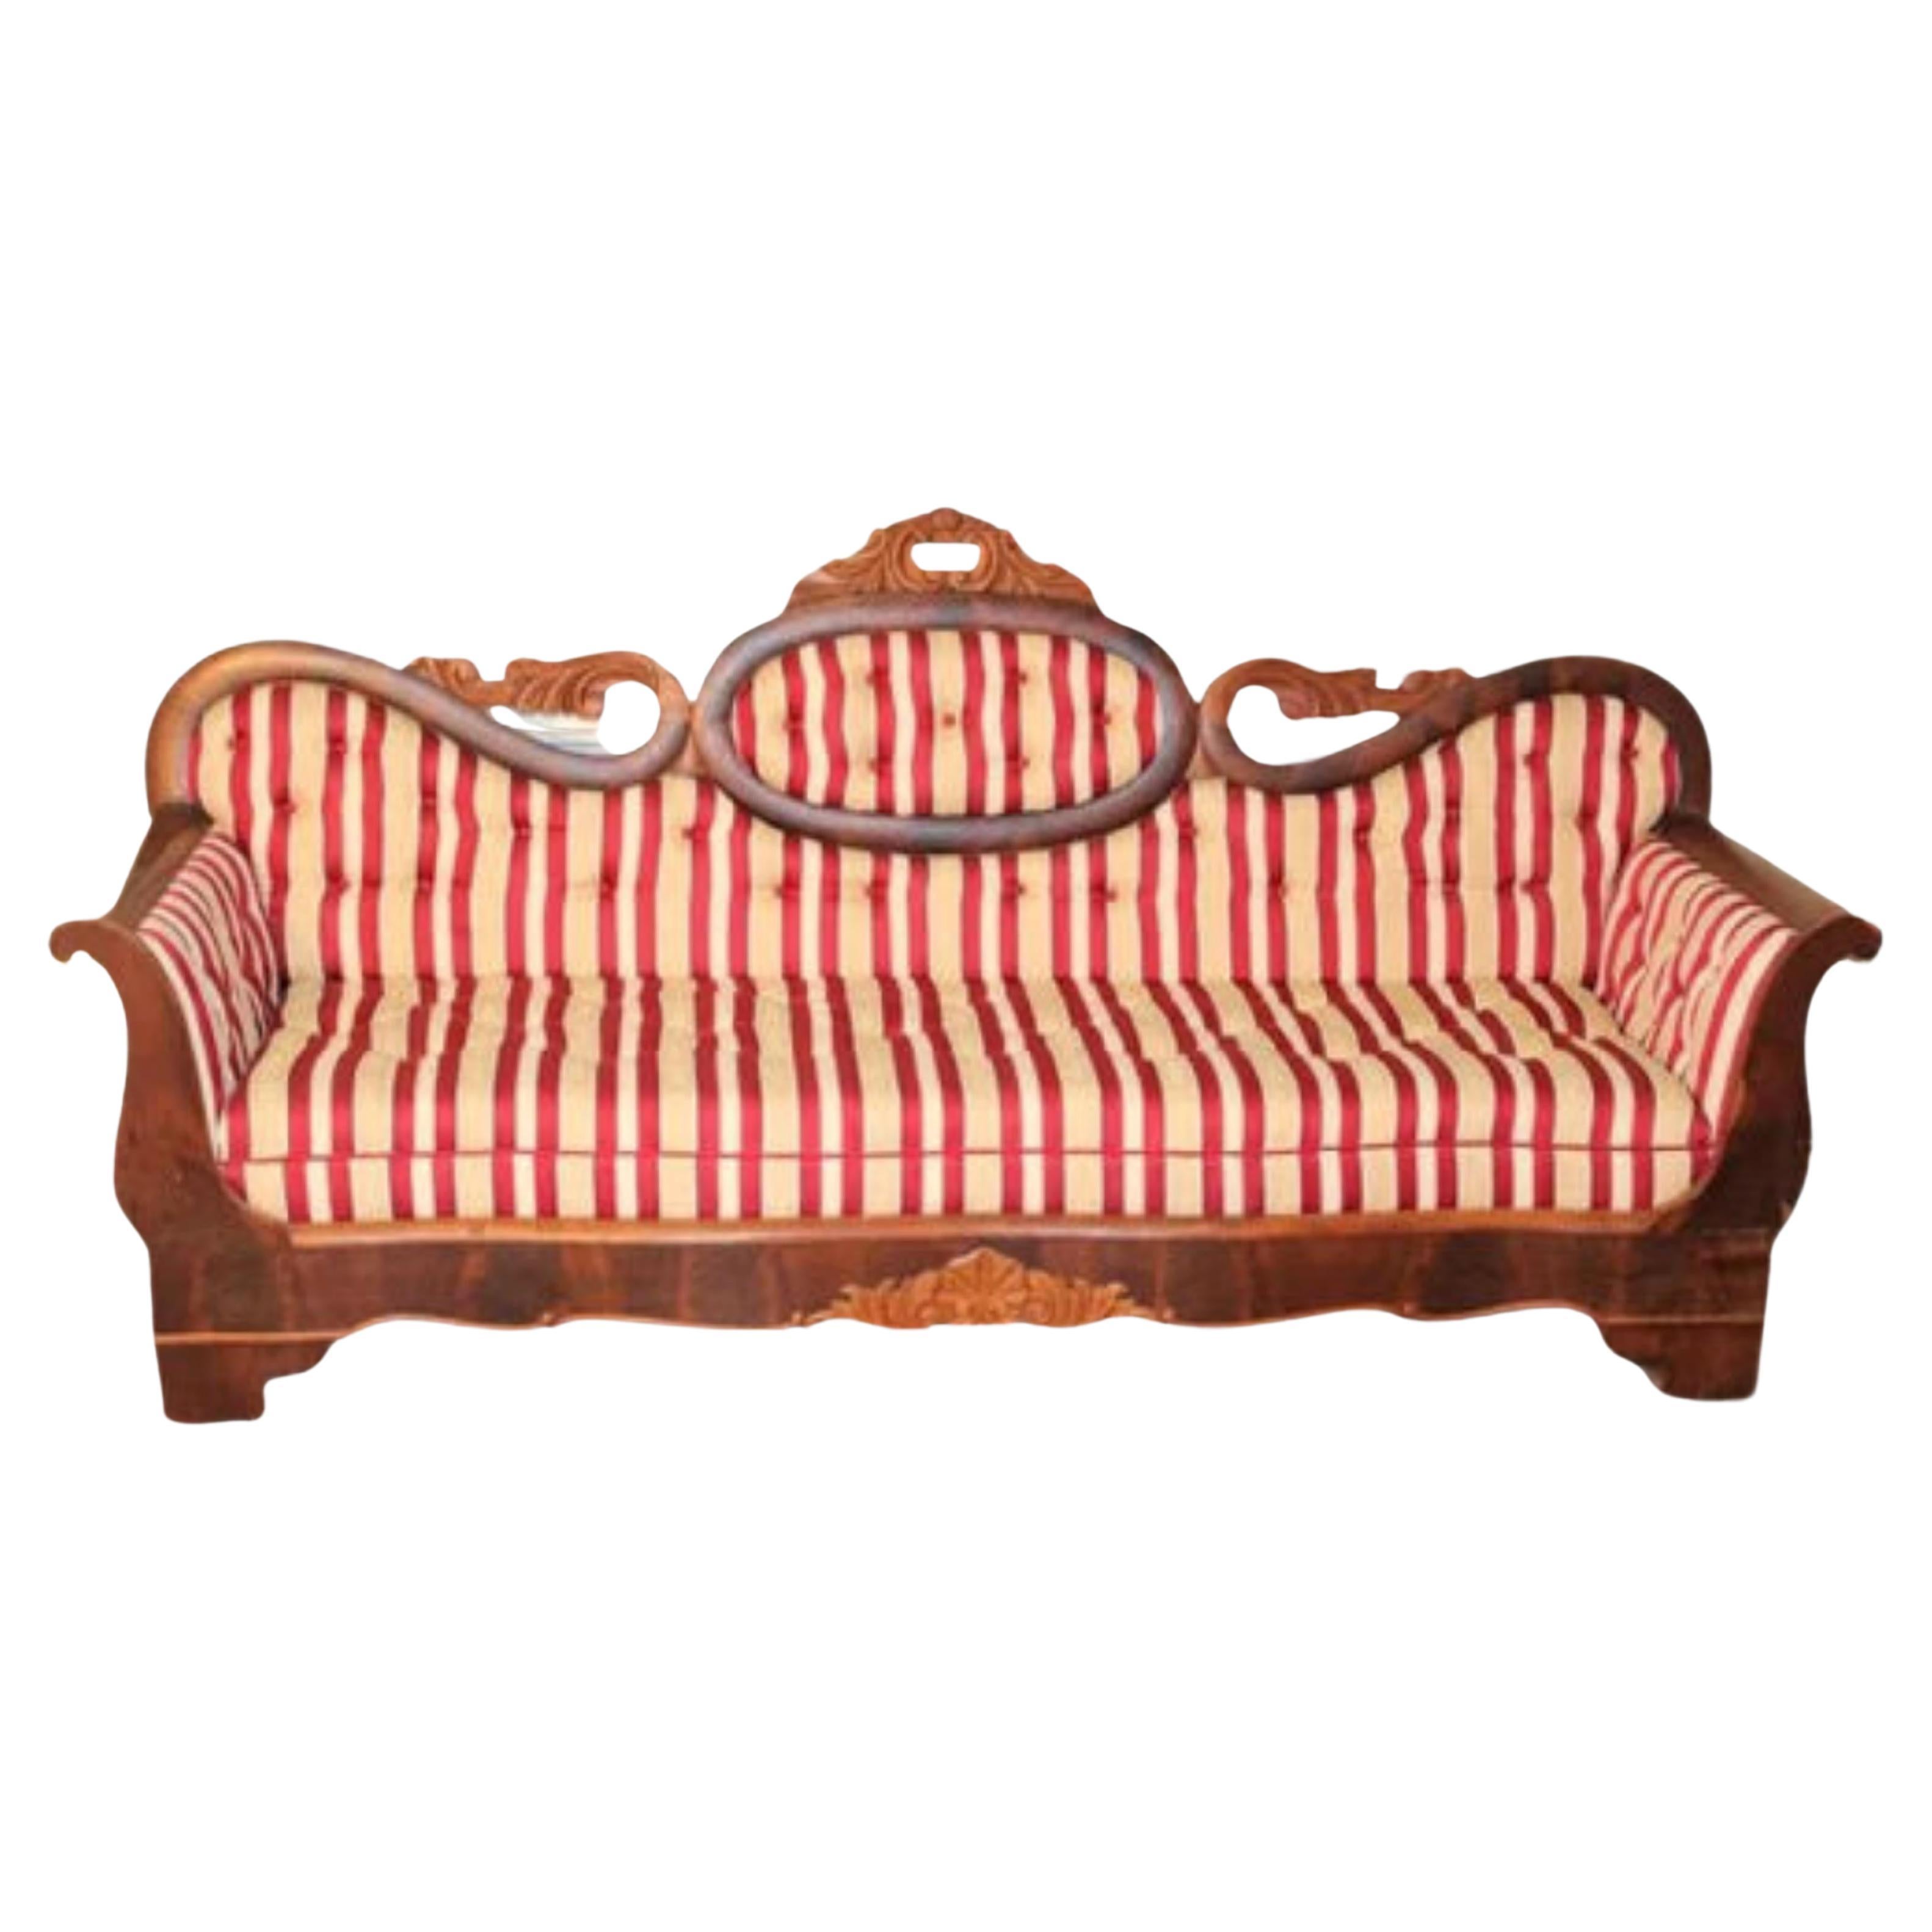 1800's Antique Empire Period, Medallion Back, New Upholstery, Red/Beige Sofa For Sale